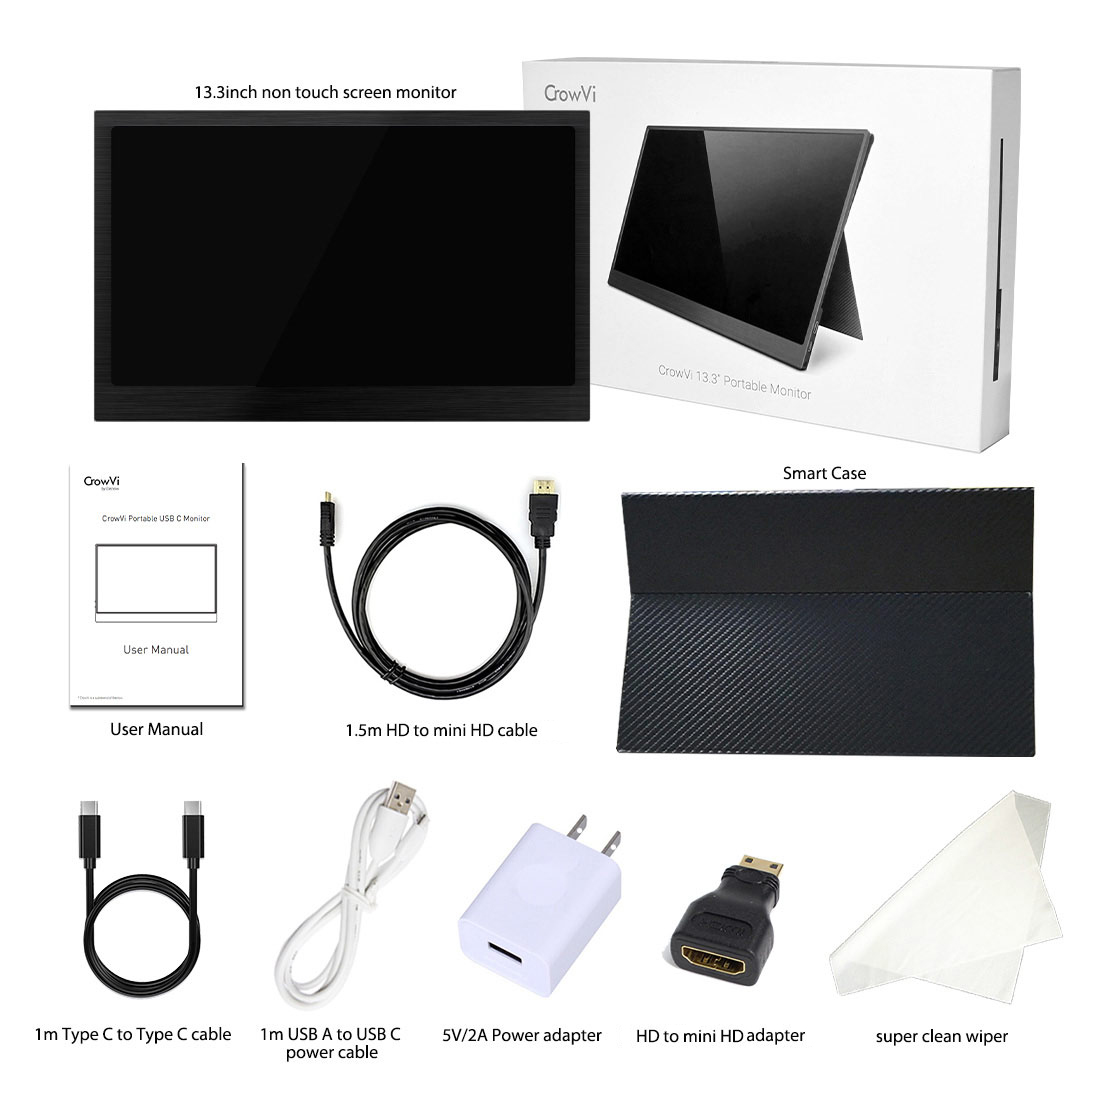 CrowVi 13.3 inch IPS monitor Packaging